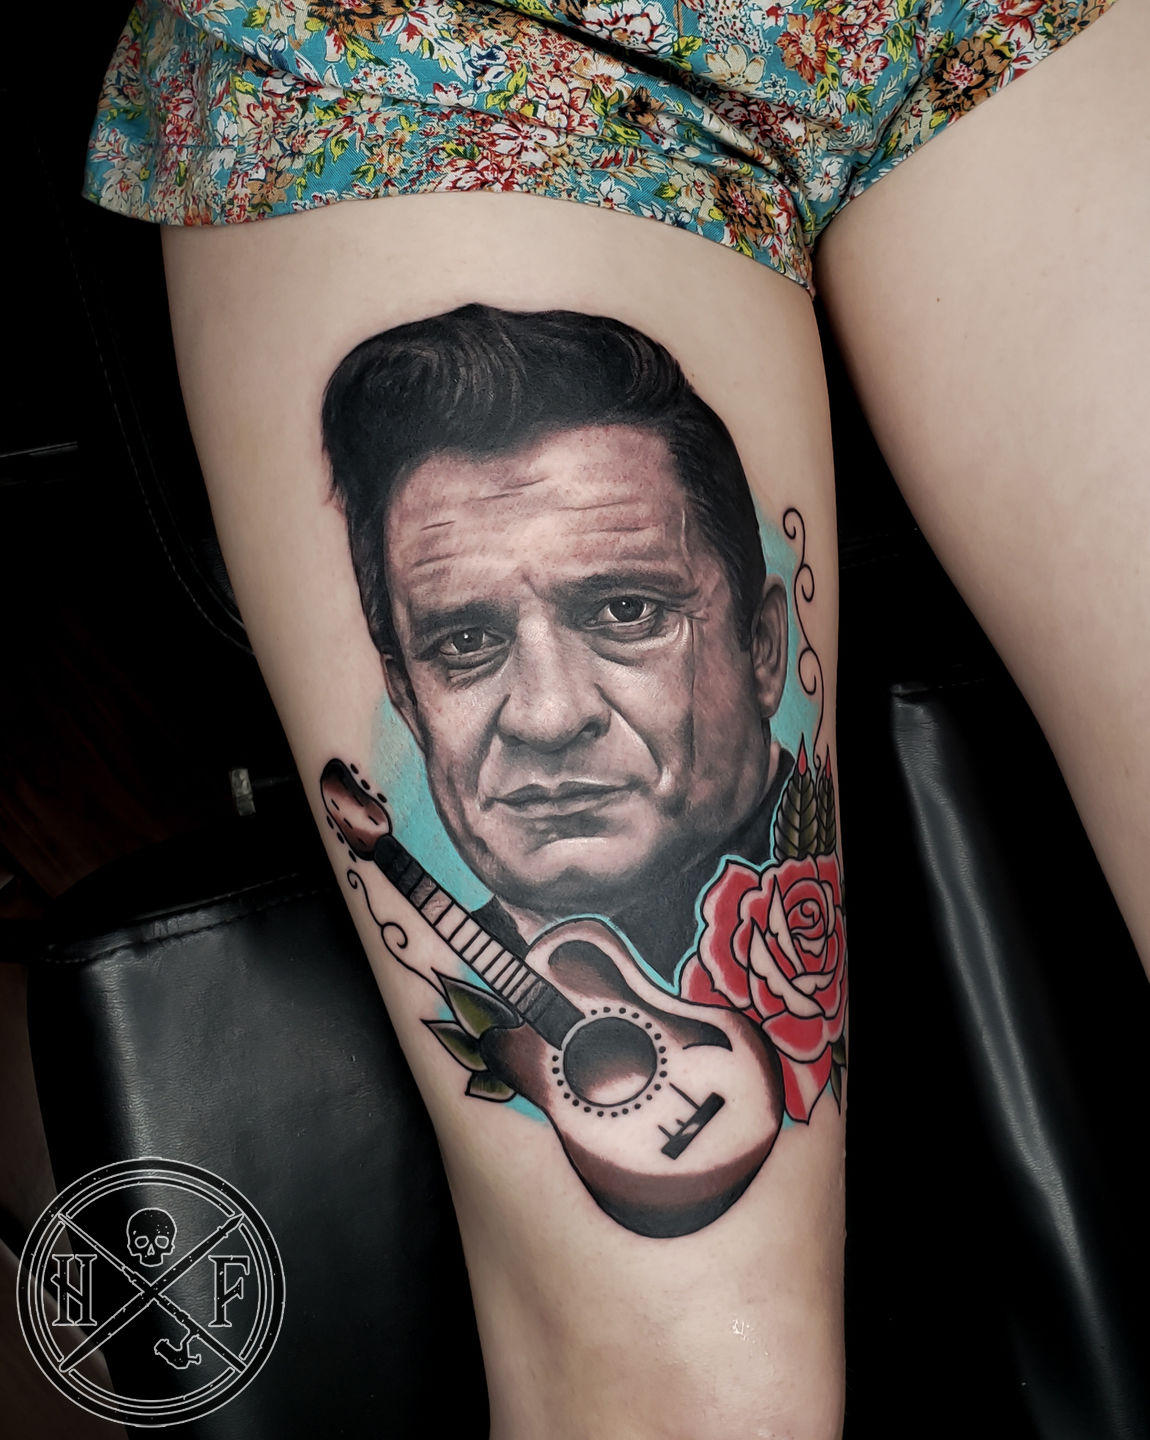 Tattoos by Shaleea - I got the 1st session done on this Johnny Cash tattoo!  One more short session needed to add some highlights and detail in the  background and this will